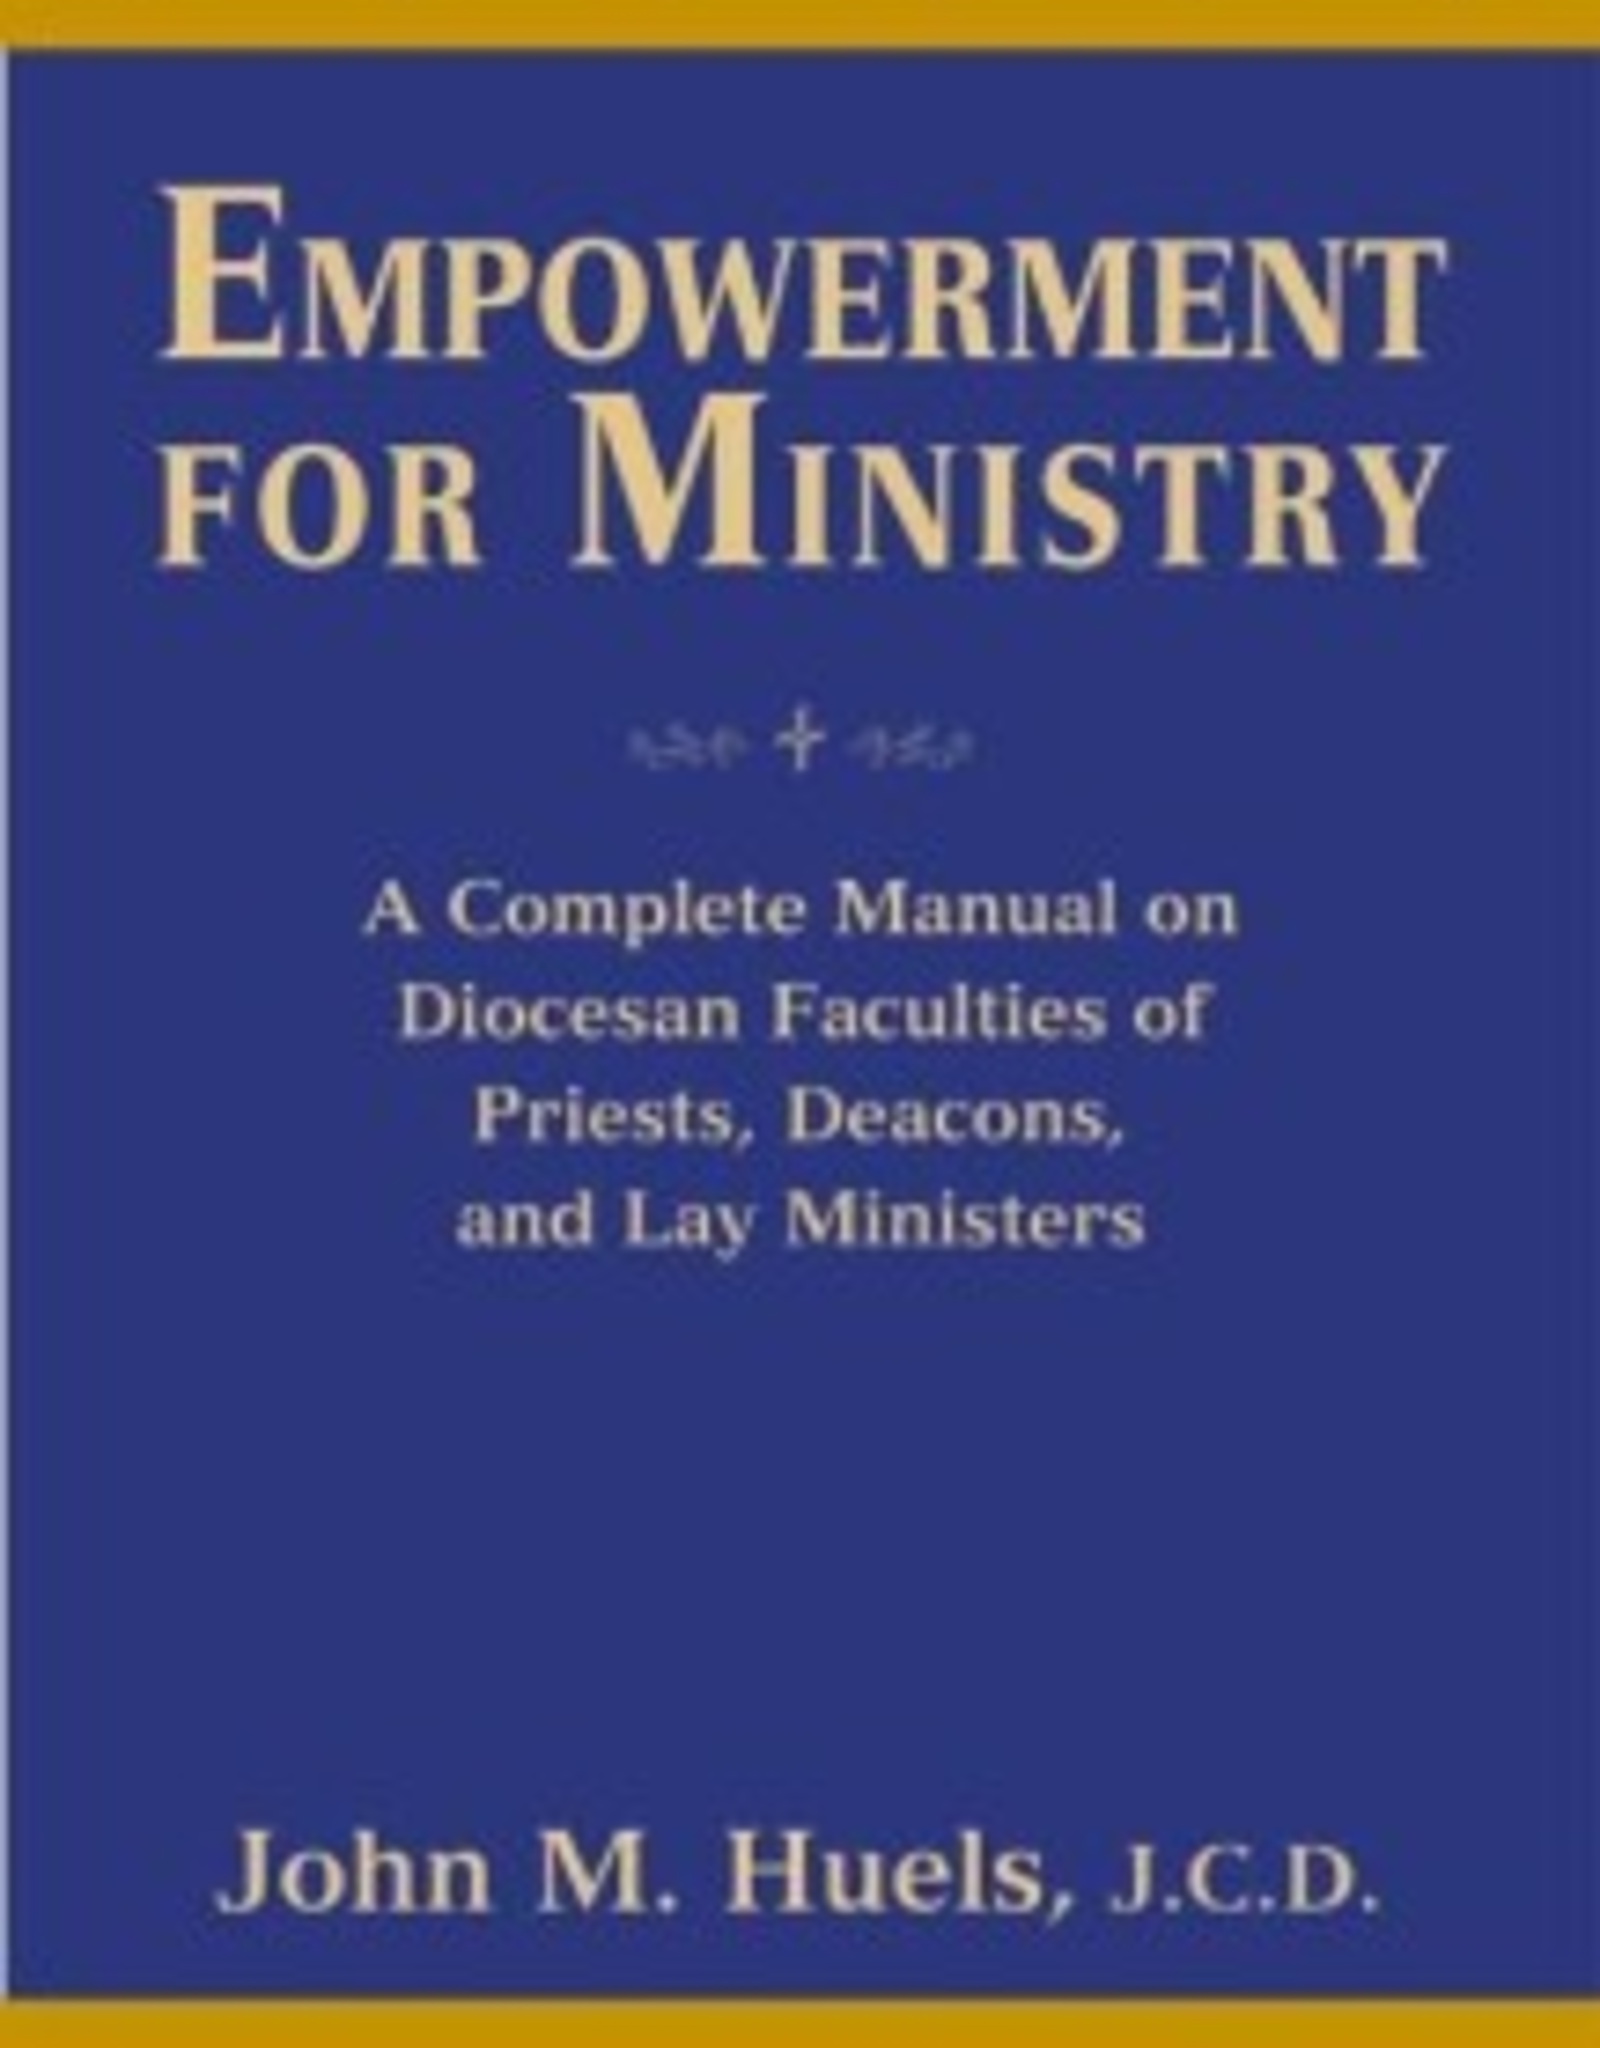 Paulist Press Empowerment for Ministry:  A Complete Manual on Diocesan Faculties for Priests, Deacons, and Lay Ministers, by John M. Huels, JCD (paperback)